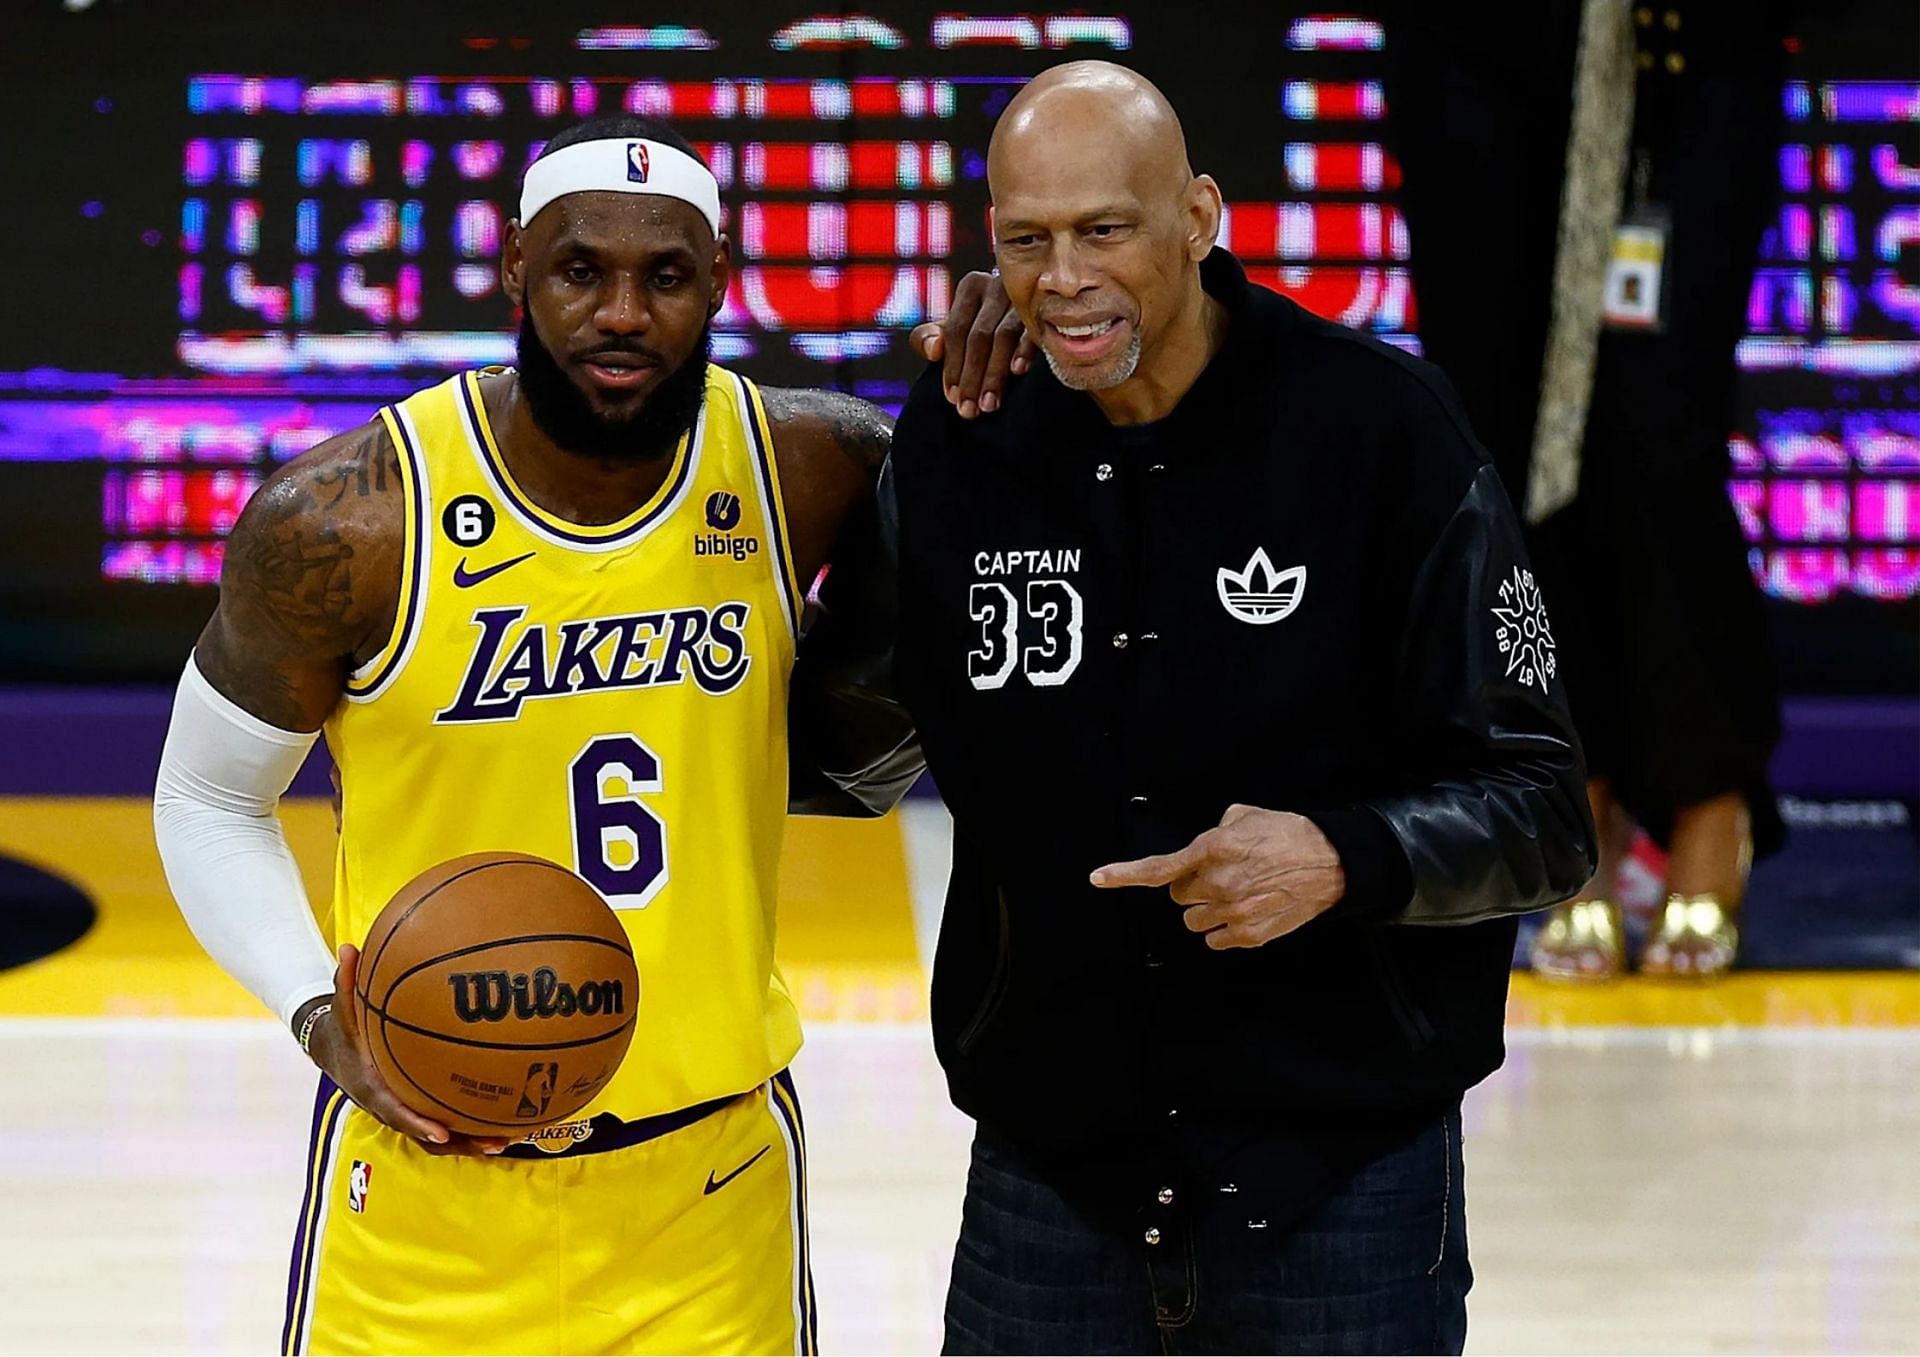 LeBron James and Kareem Abdul-Jabbar are the only NBA players who have reached at least 38K points. [photo: Olympics]